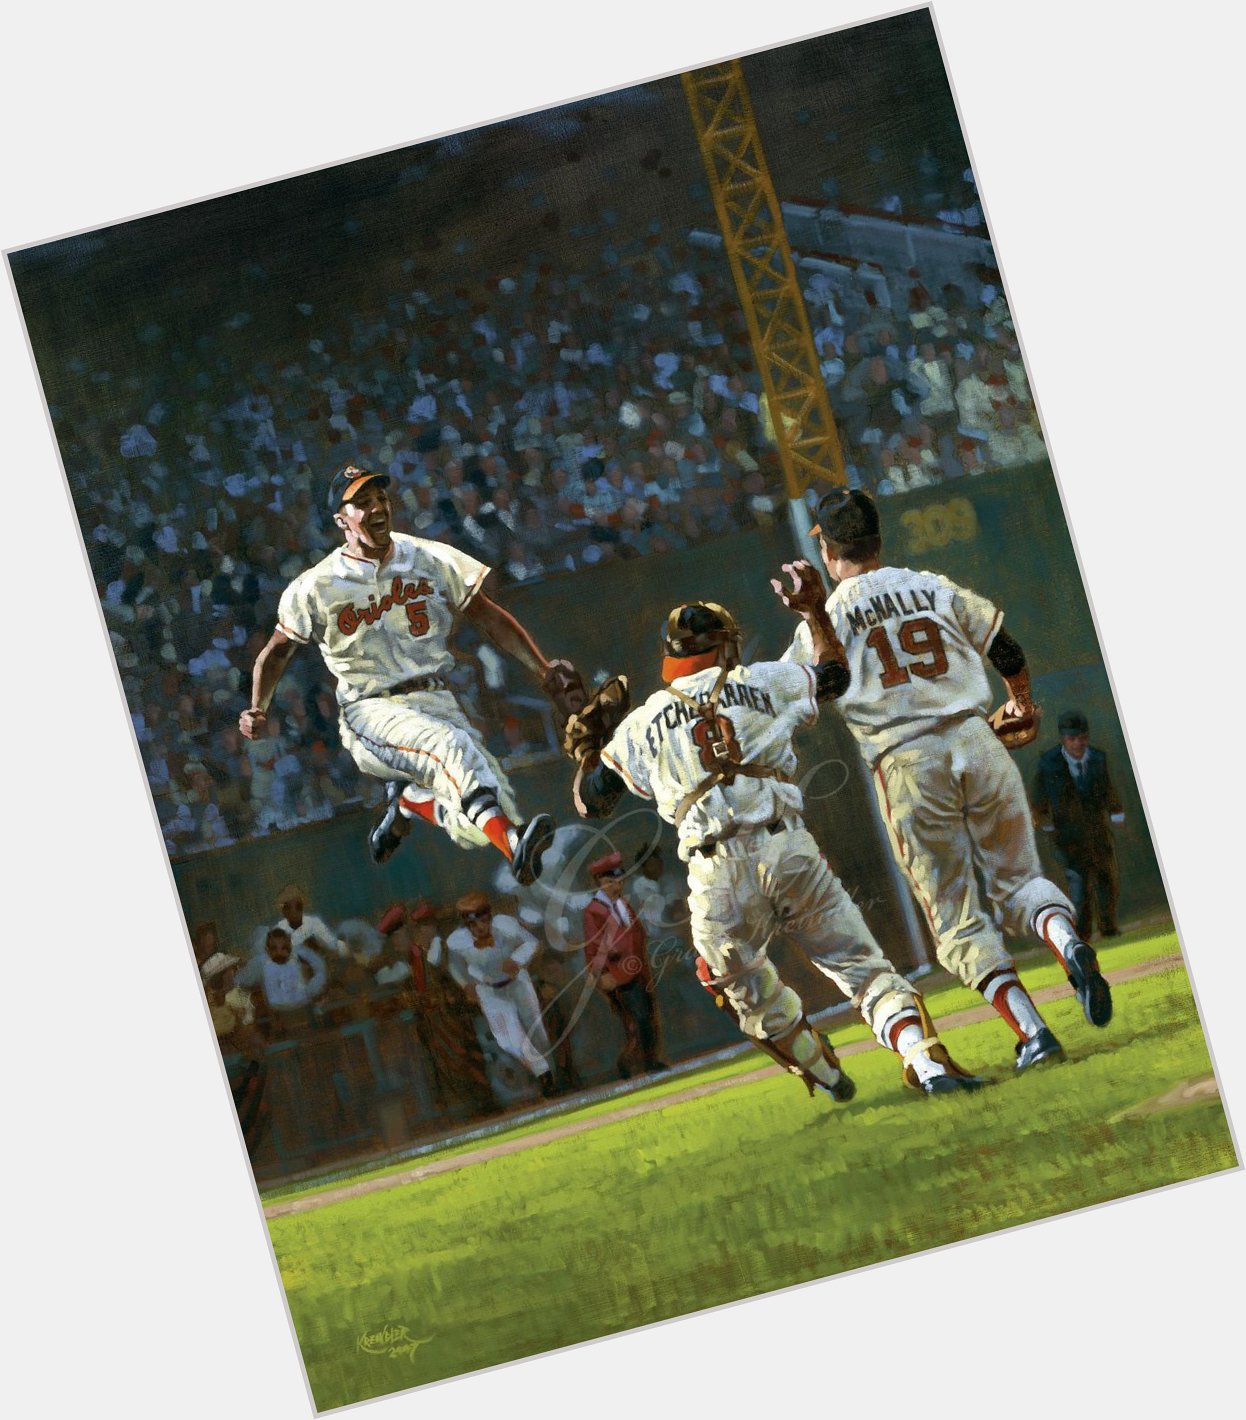 Happy 78th birthday to Brooks Robinson!! An oldie, but a goodie. 